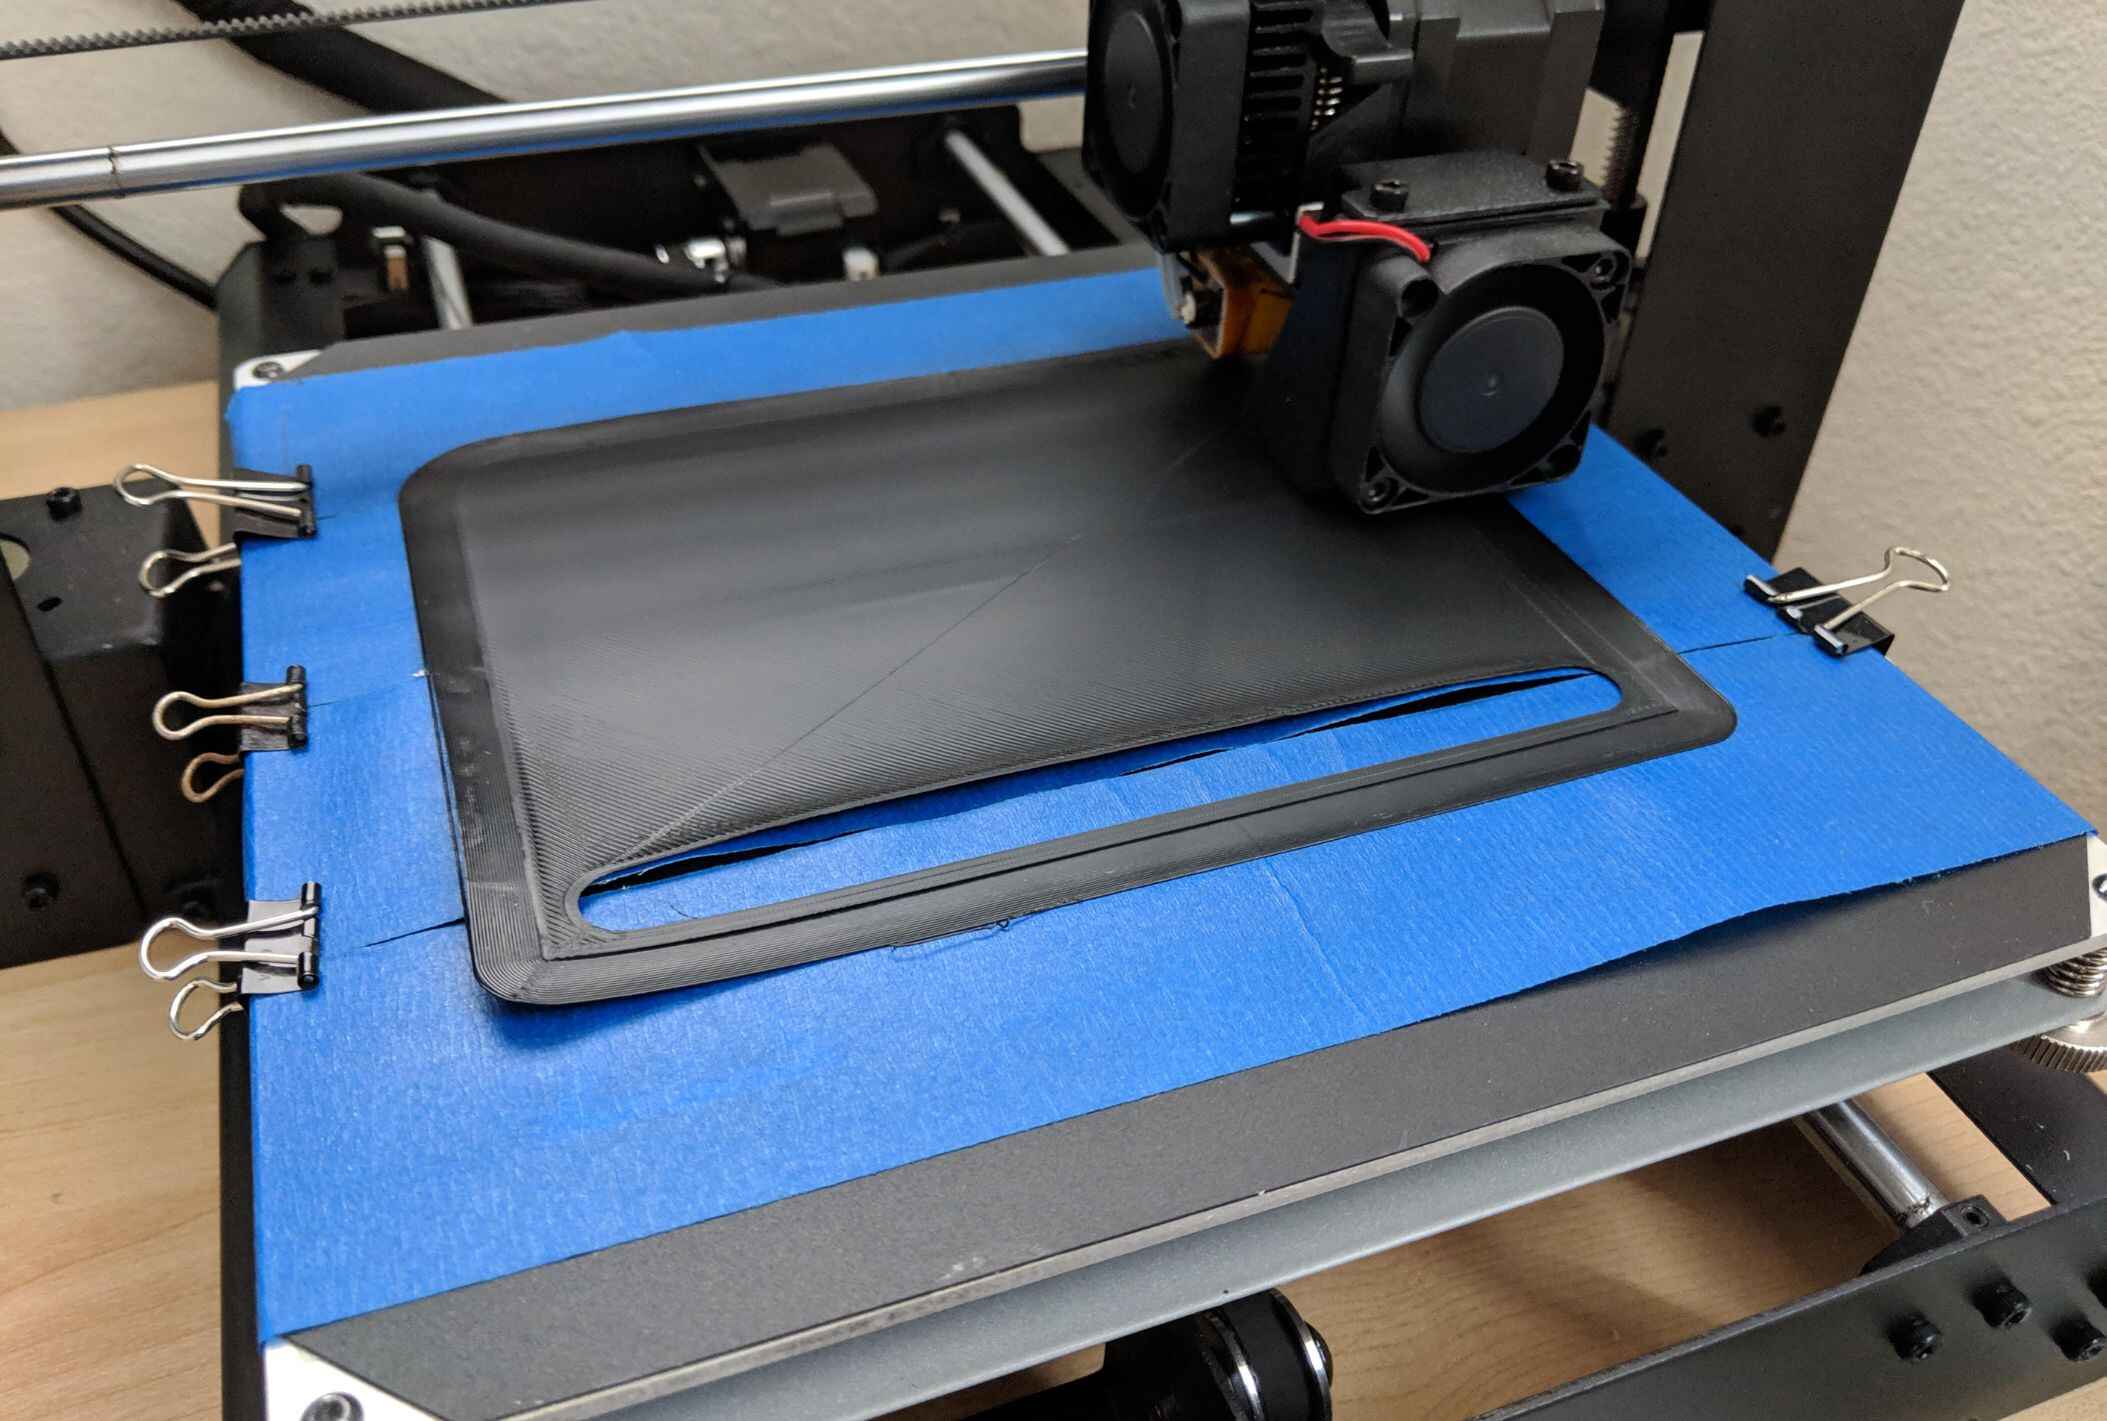 What To Use On Blue Tape For A 3D Printer Bed